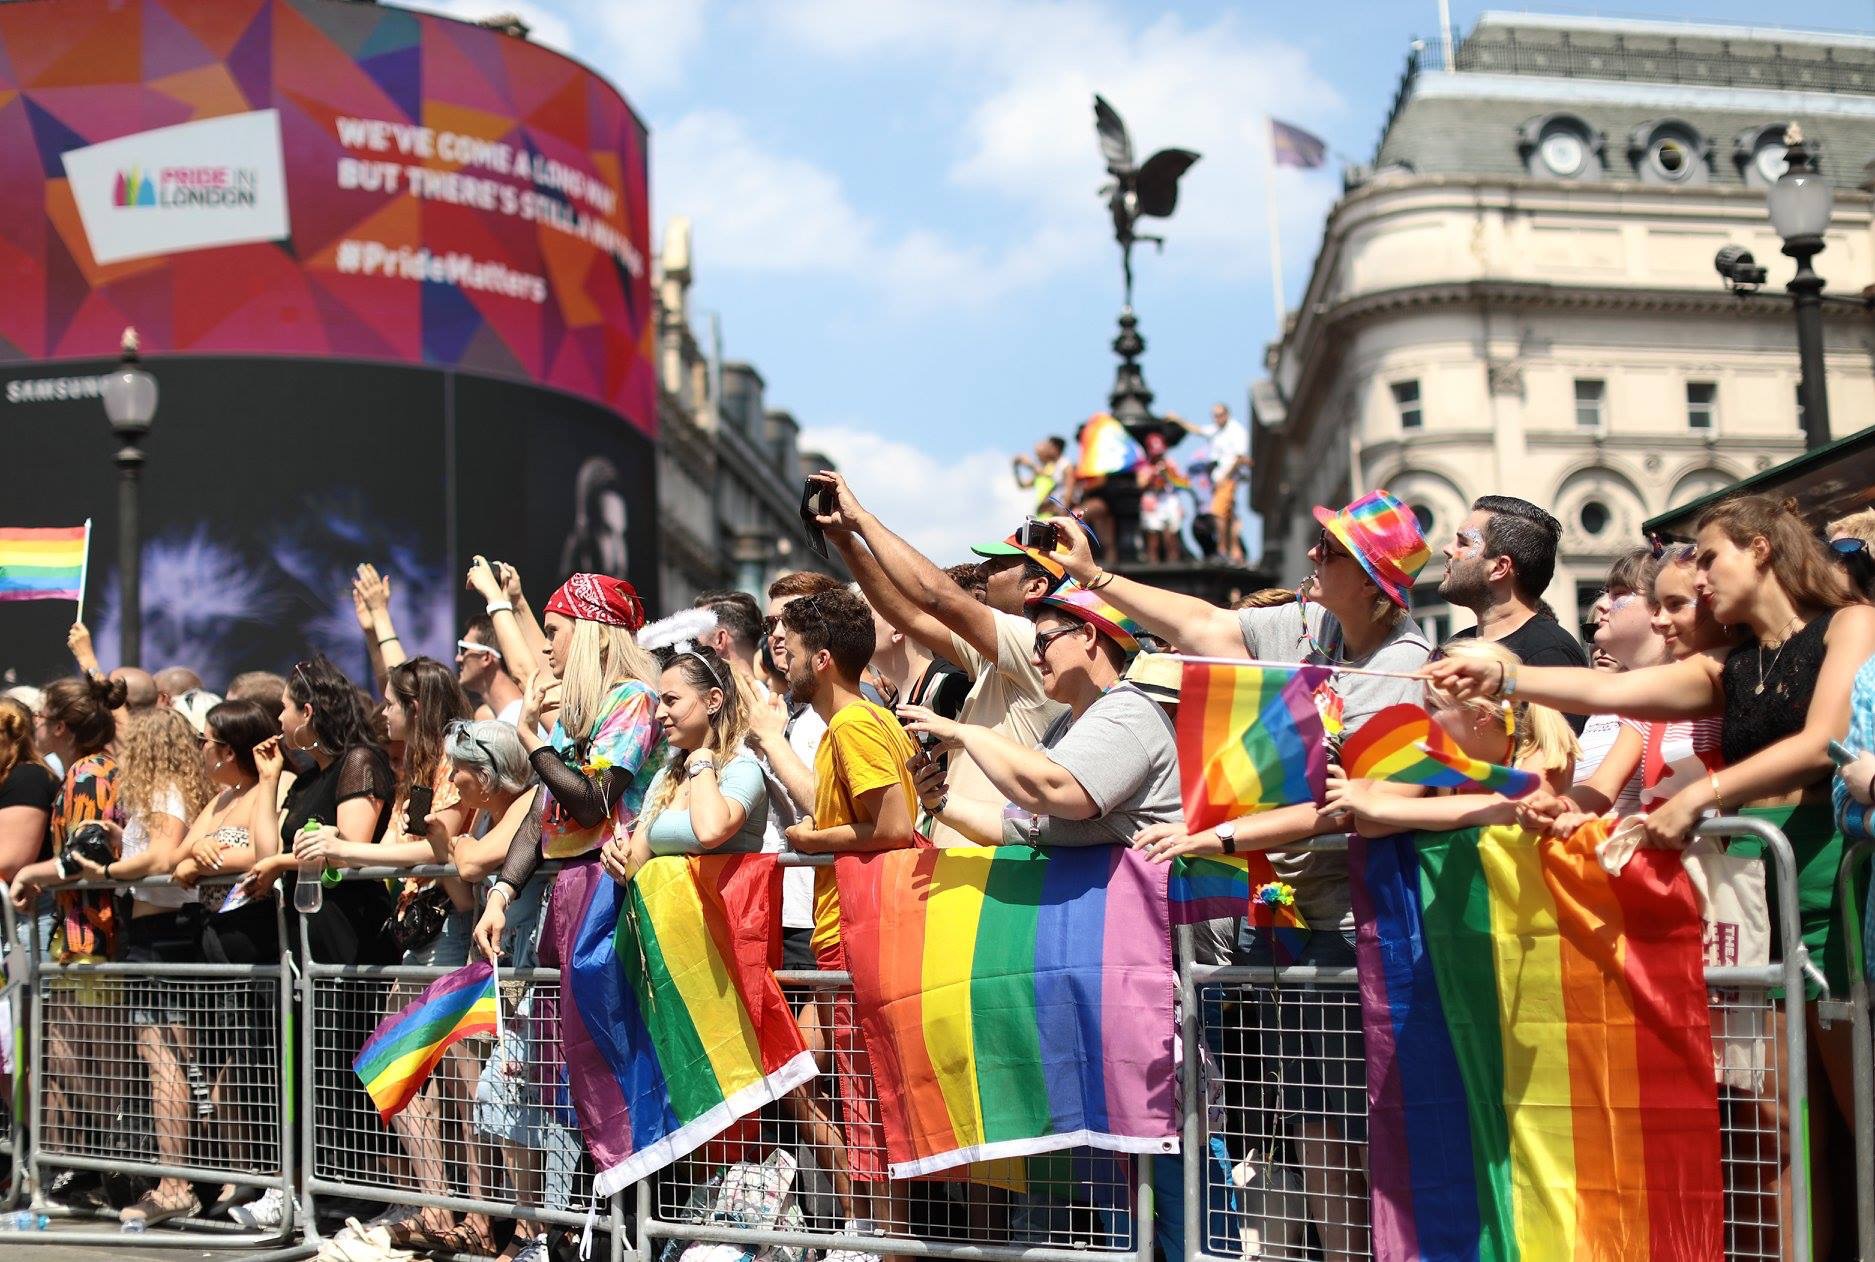 London Pride 2019. Still a lot of work to do